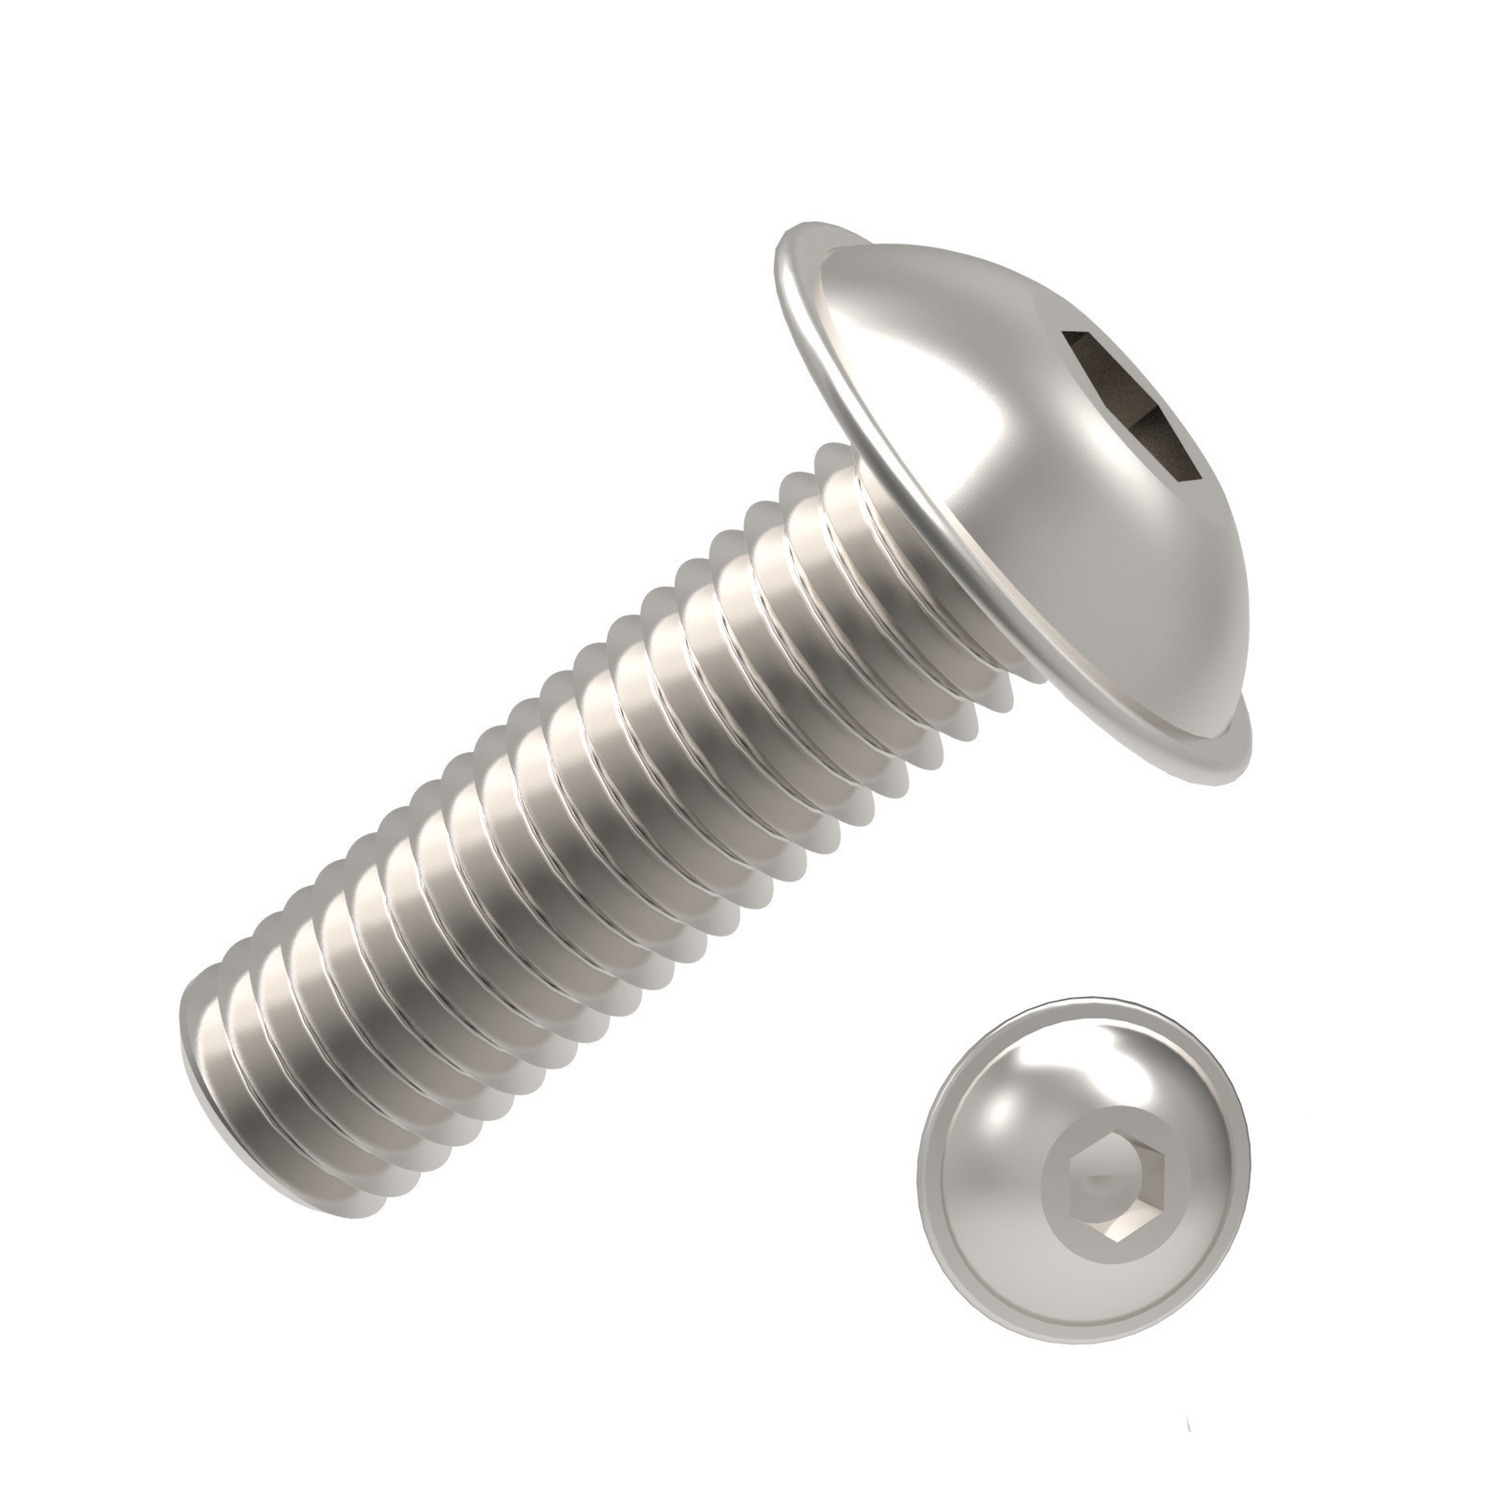 Flanged Button Screws Threaded within 2,5 x pitch of head. Made from A2 Stainless Steel.